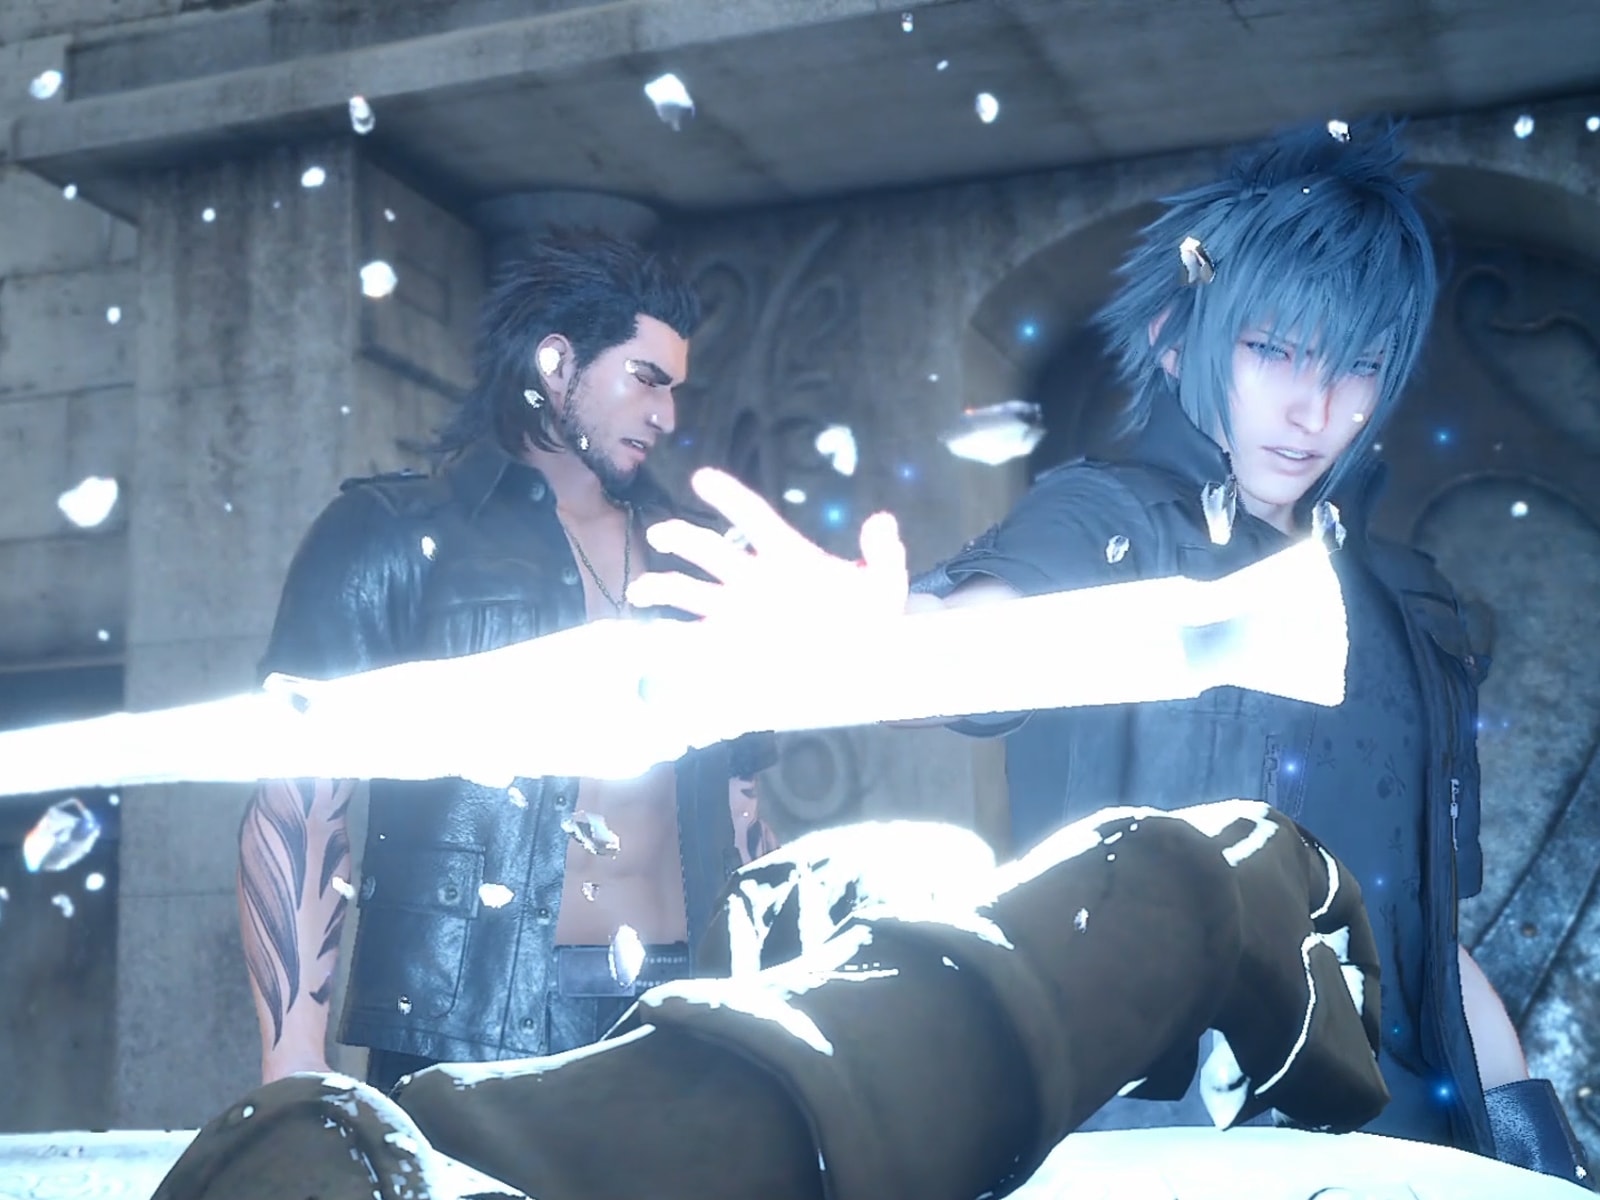 Screenshot from Final Fantasy 15, featuring main character Noctis Lucis Caelum and his friends